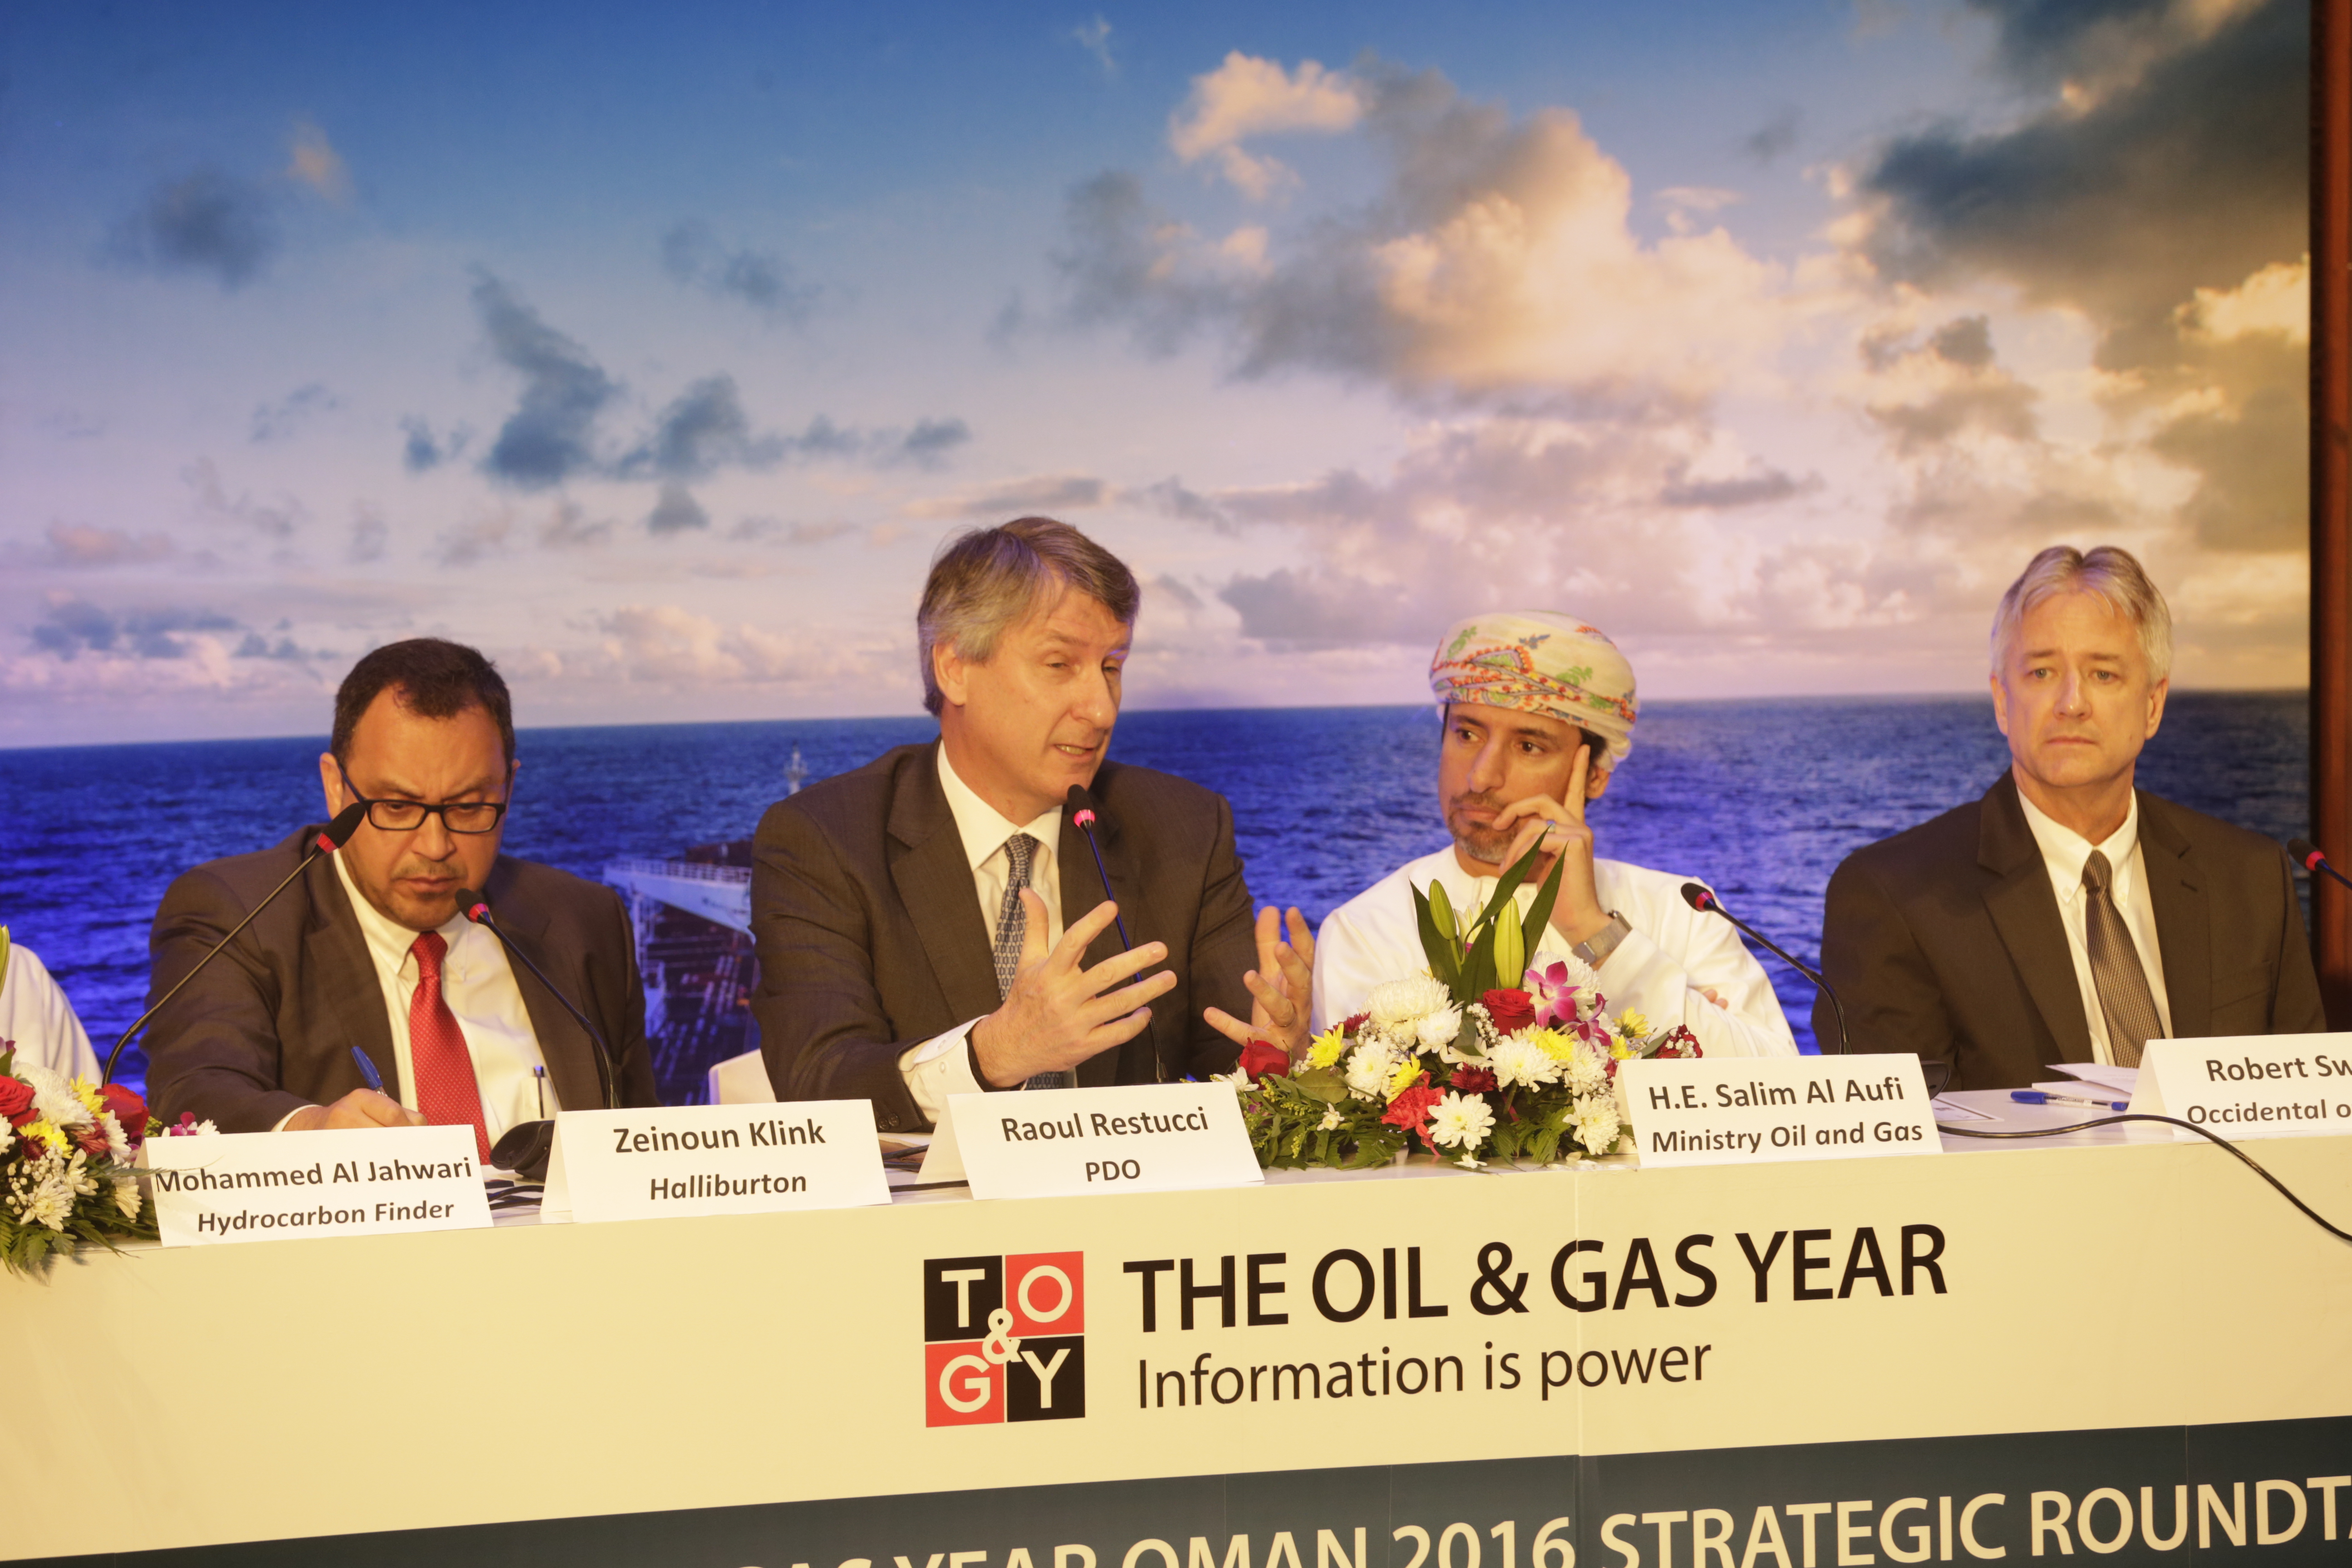 Petroleum Development Oman plans to produce 600,000 barrels of oil a day this year